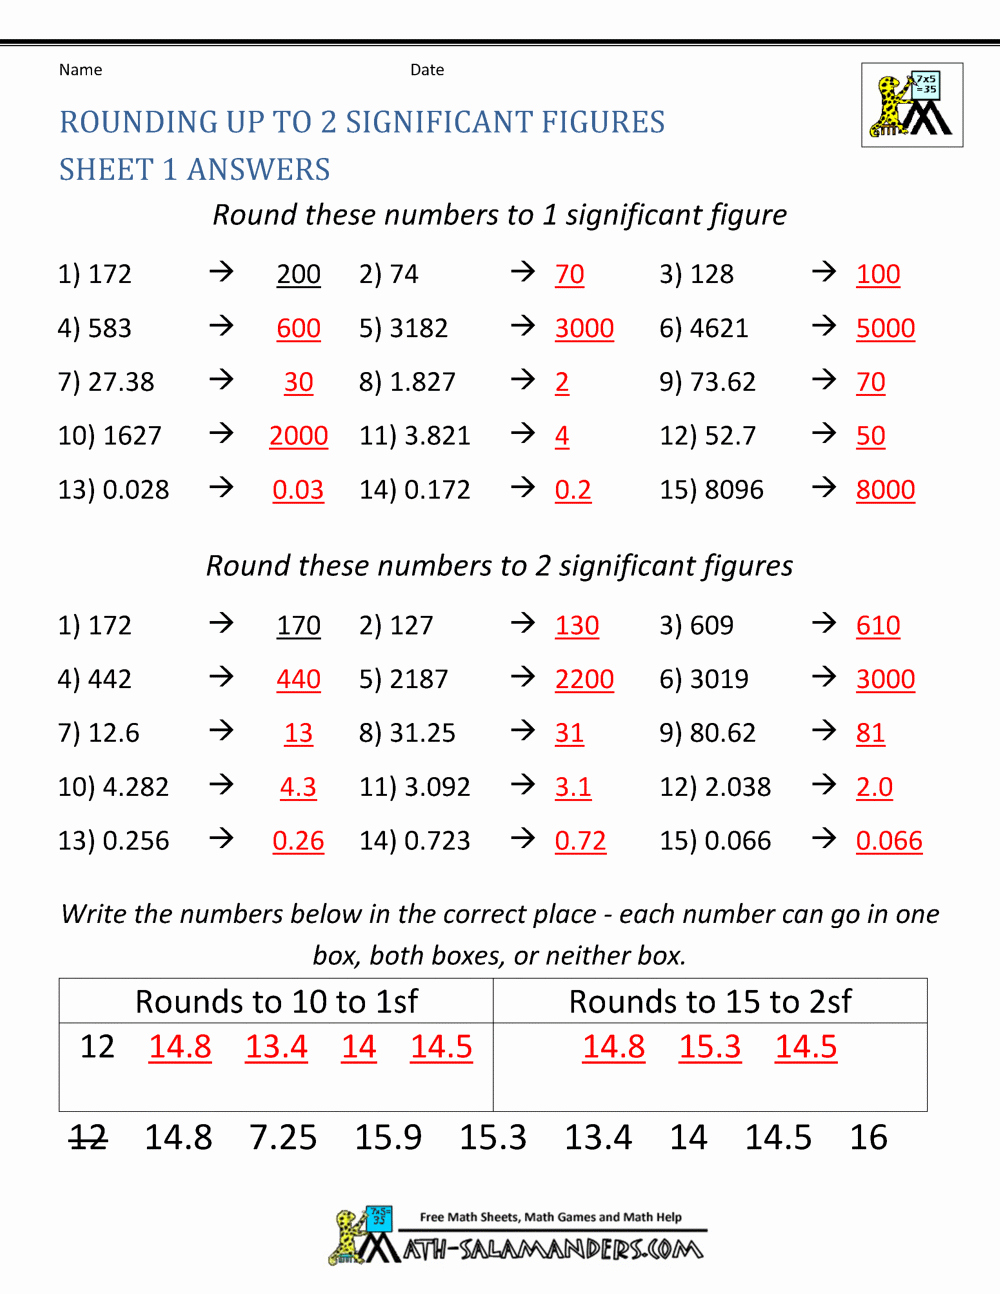 Significant Figures Worksheet with Answers Elegant Rounding Significant Figures